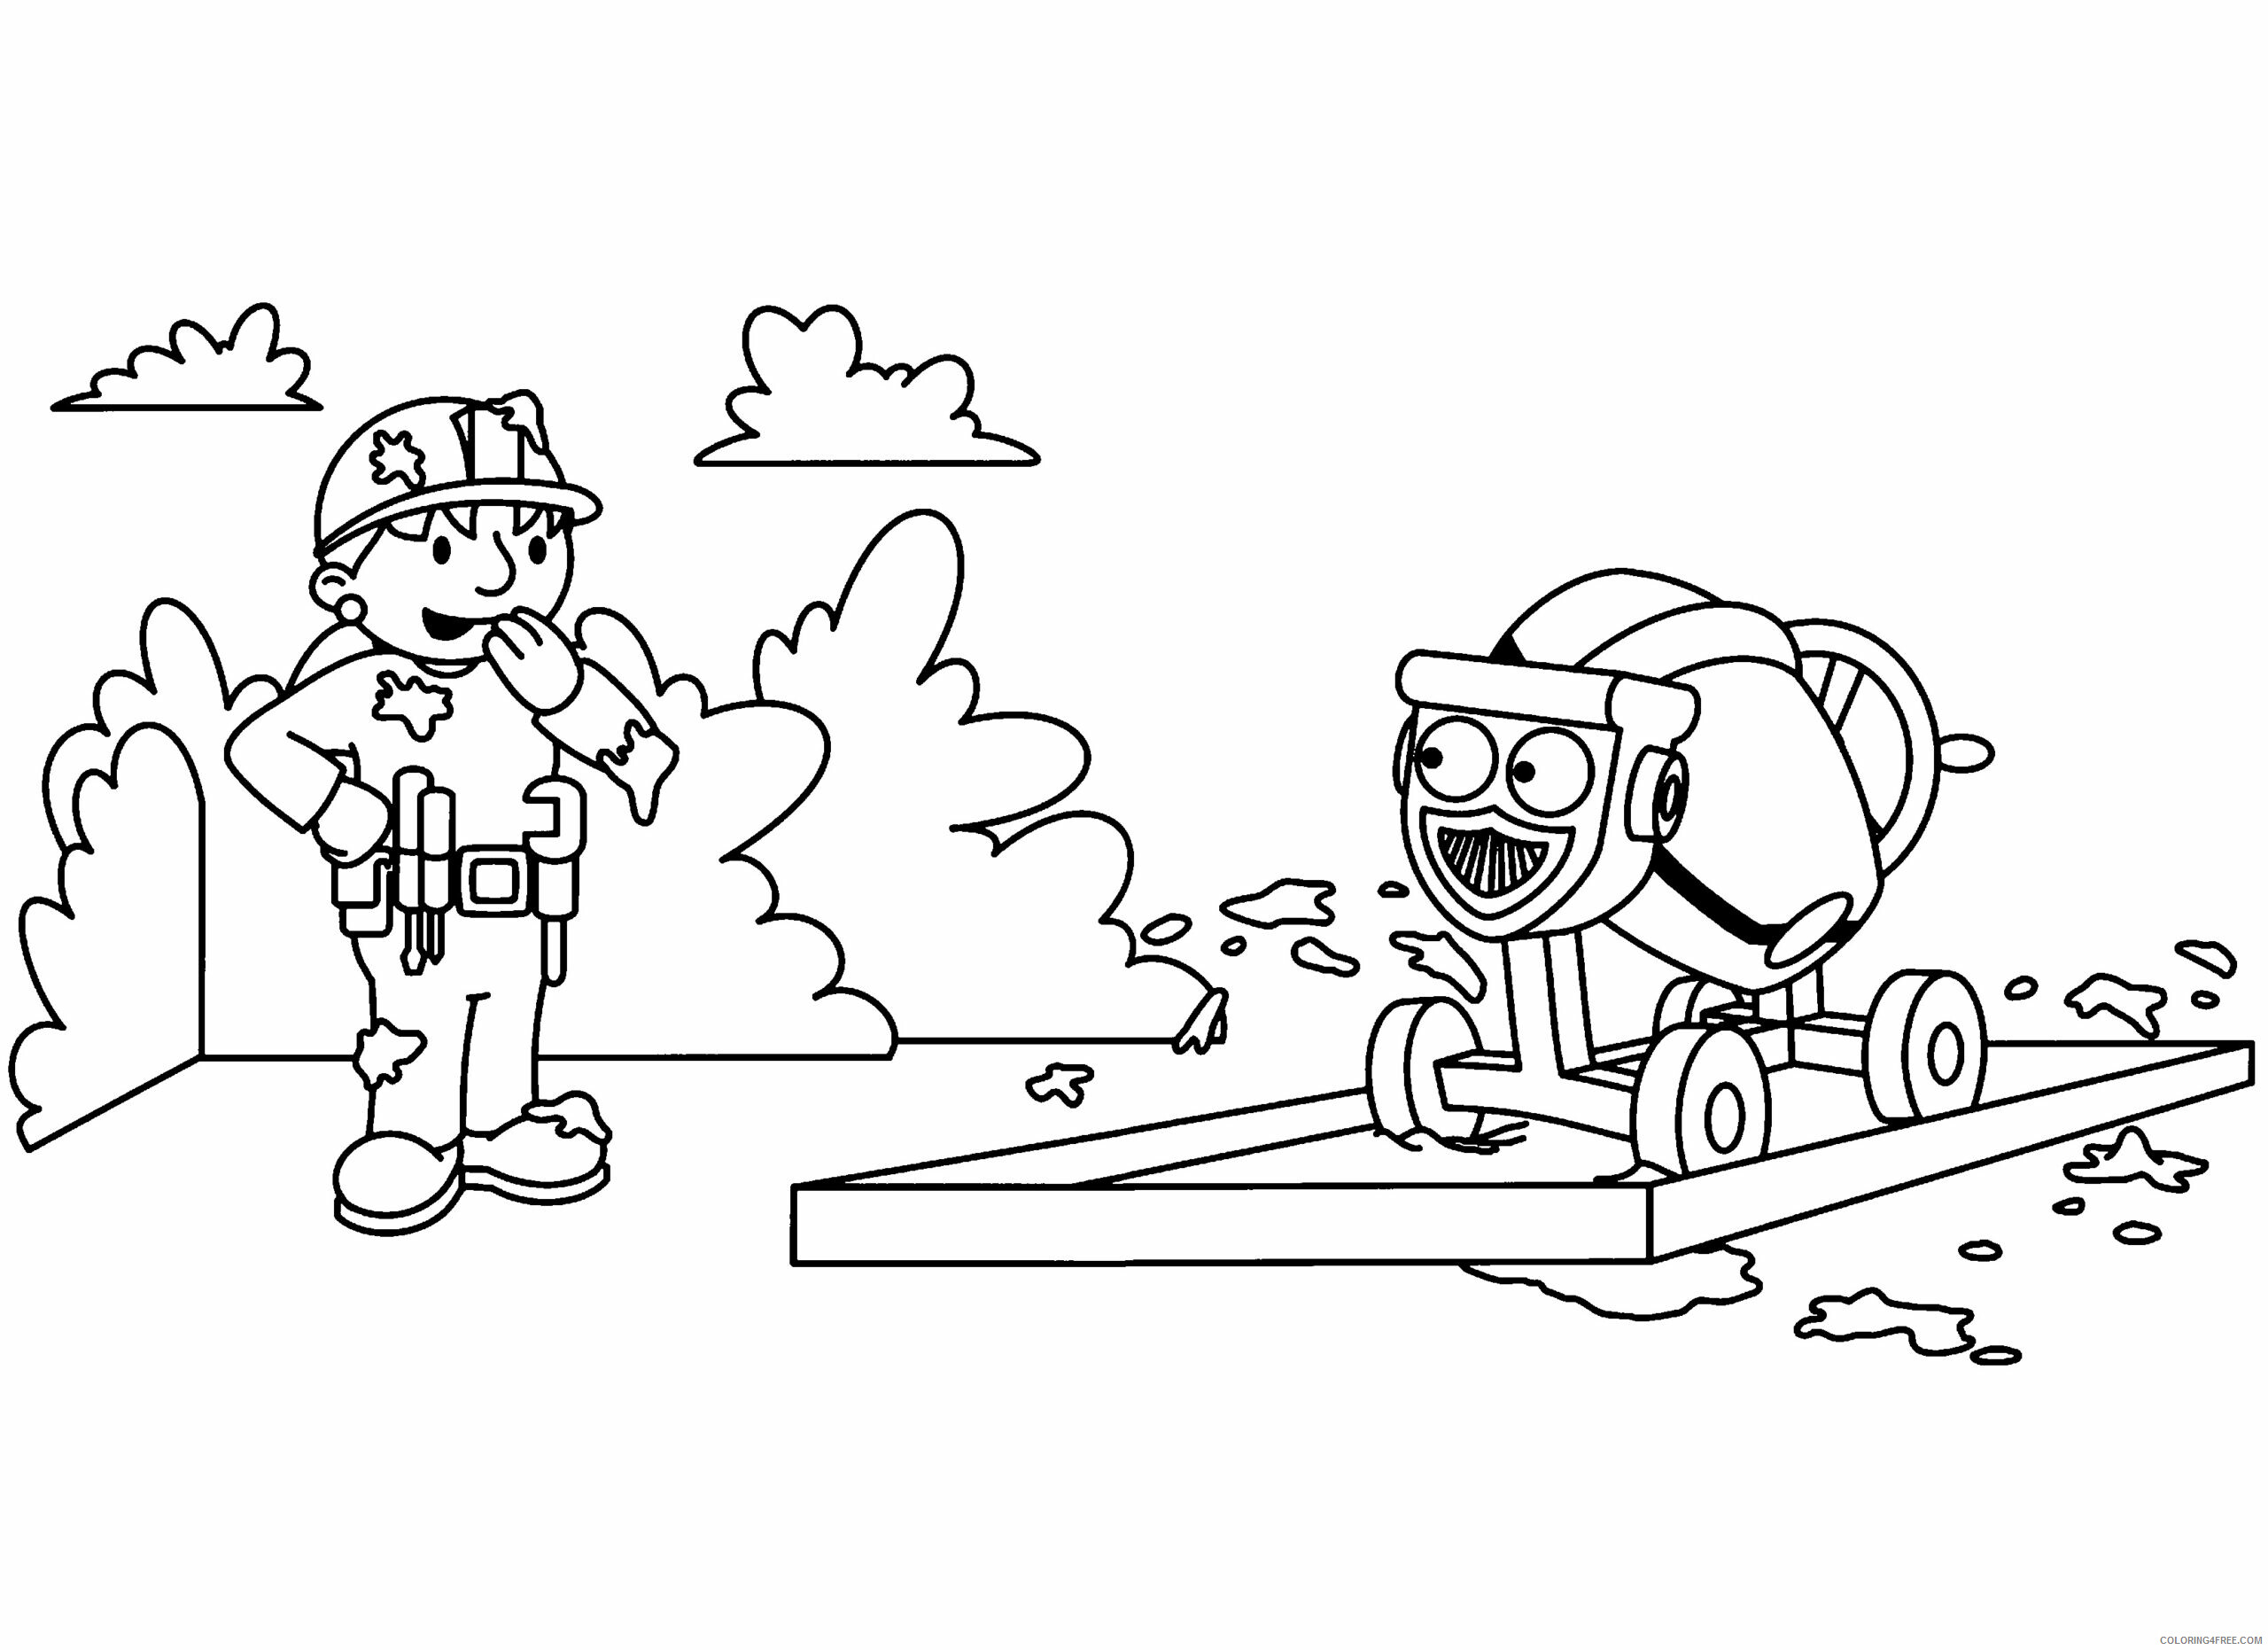 Bob the Builder Coloring Pages TV Film bob the builder 54 Printable 2020 01074 Coloring4free